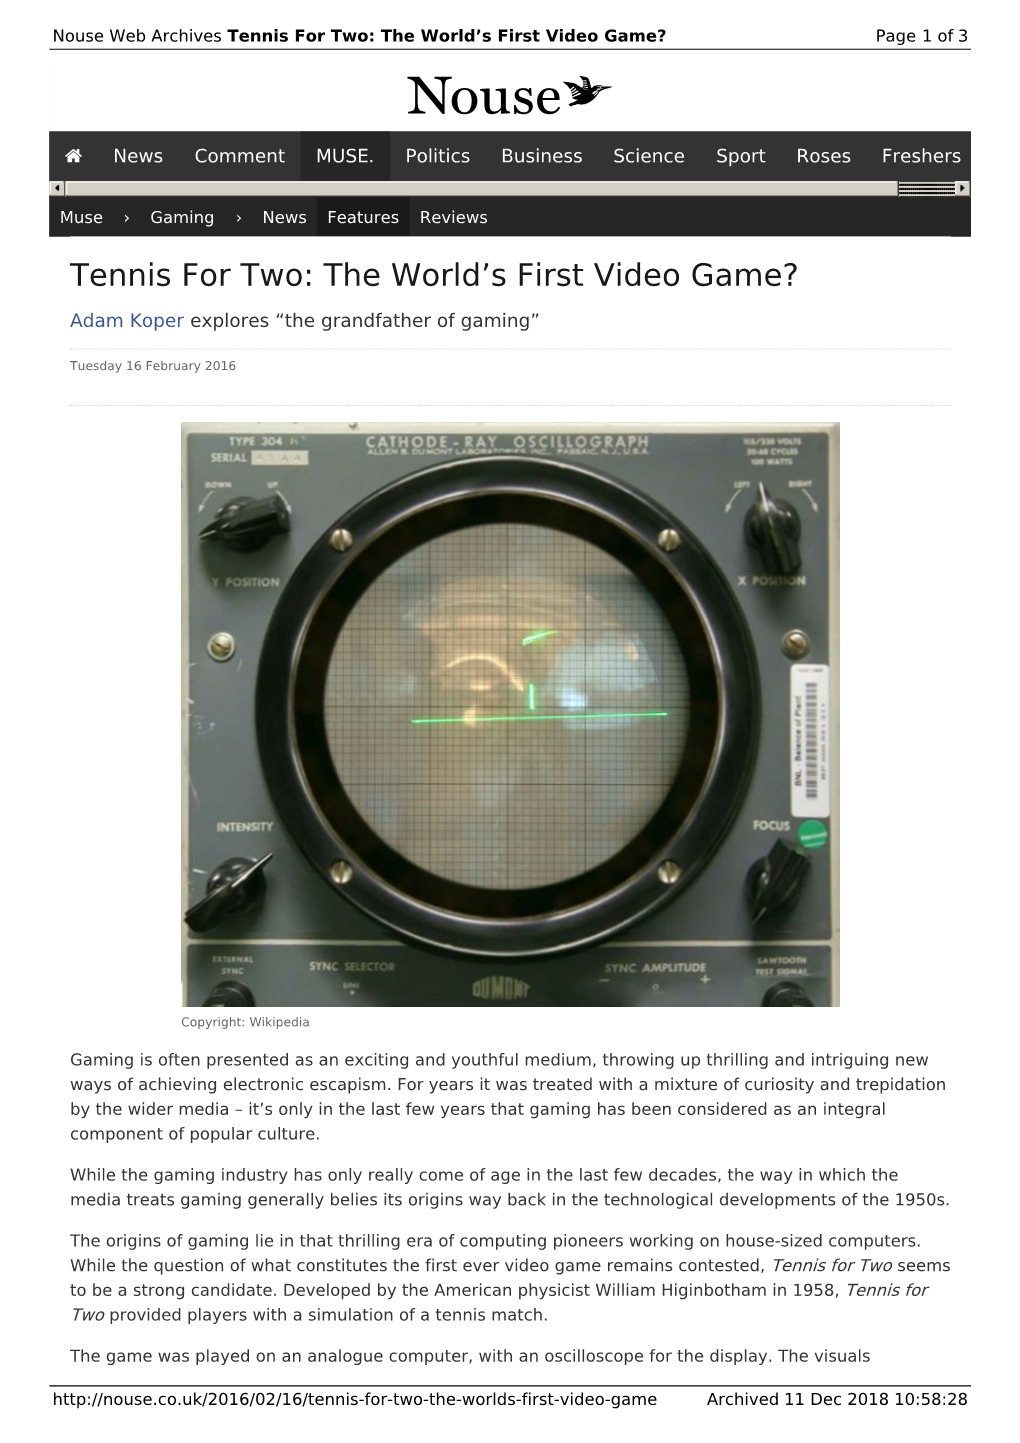 Tennis for Two: the World's First Video Game? | Nouse